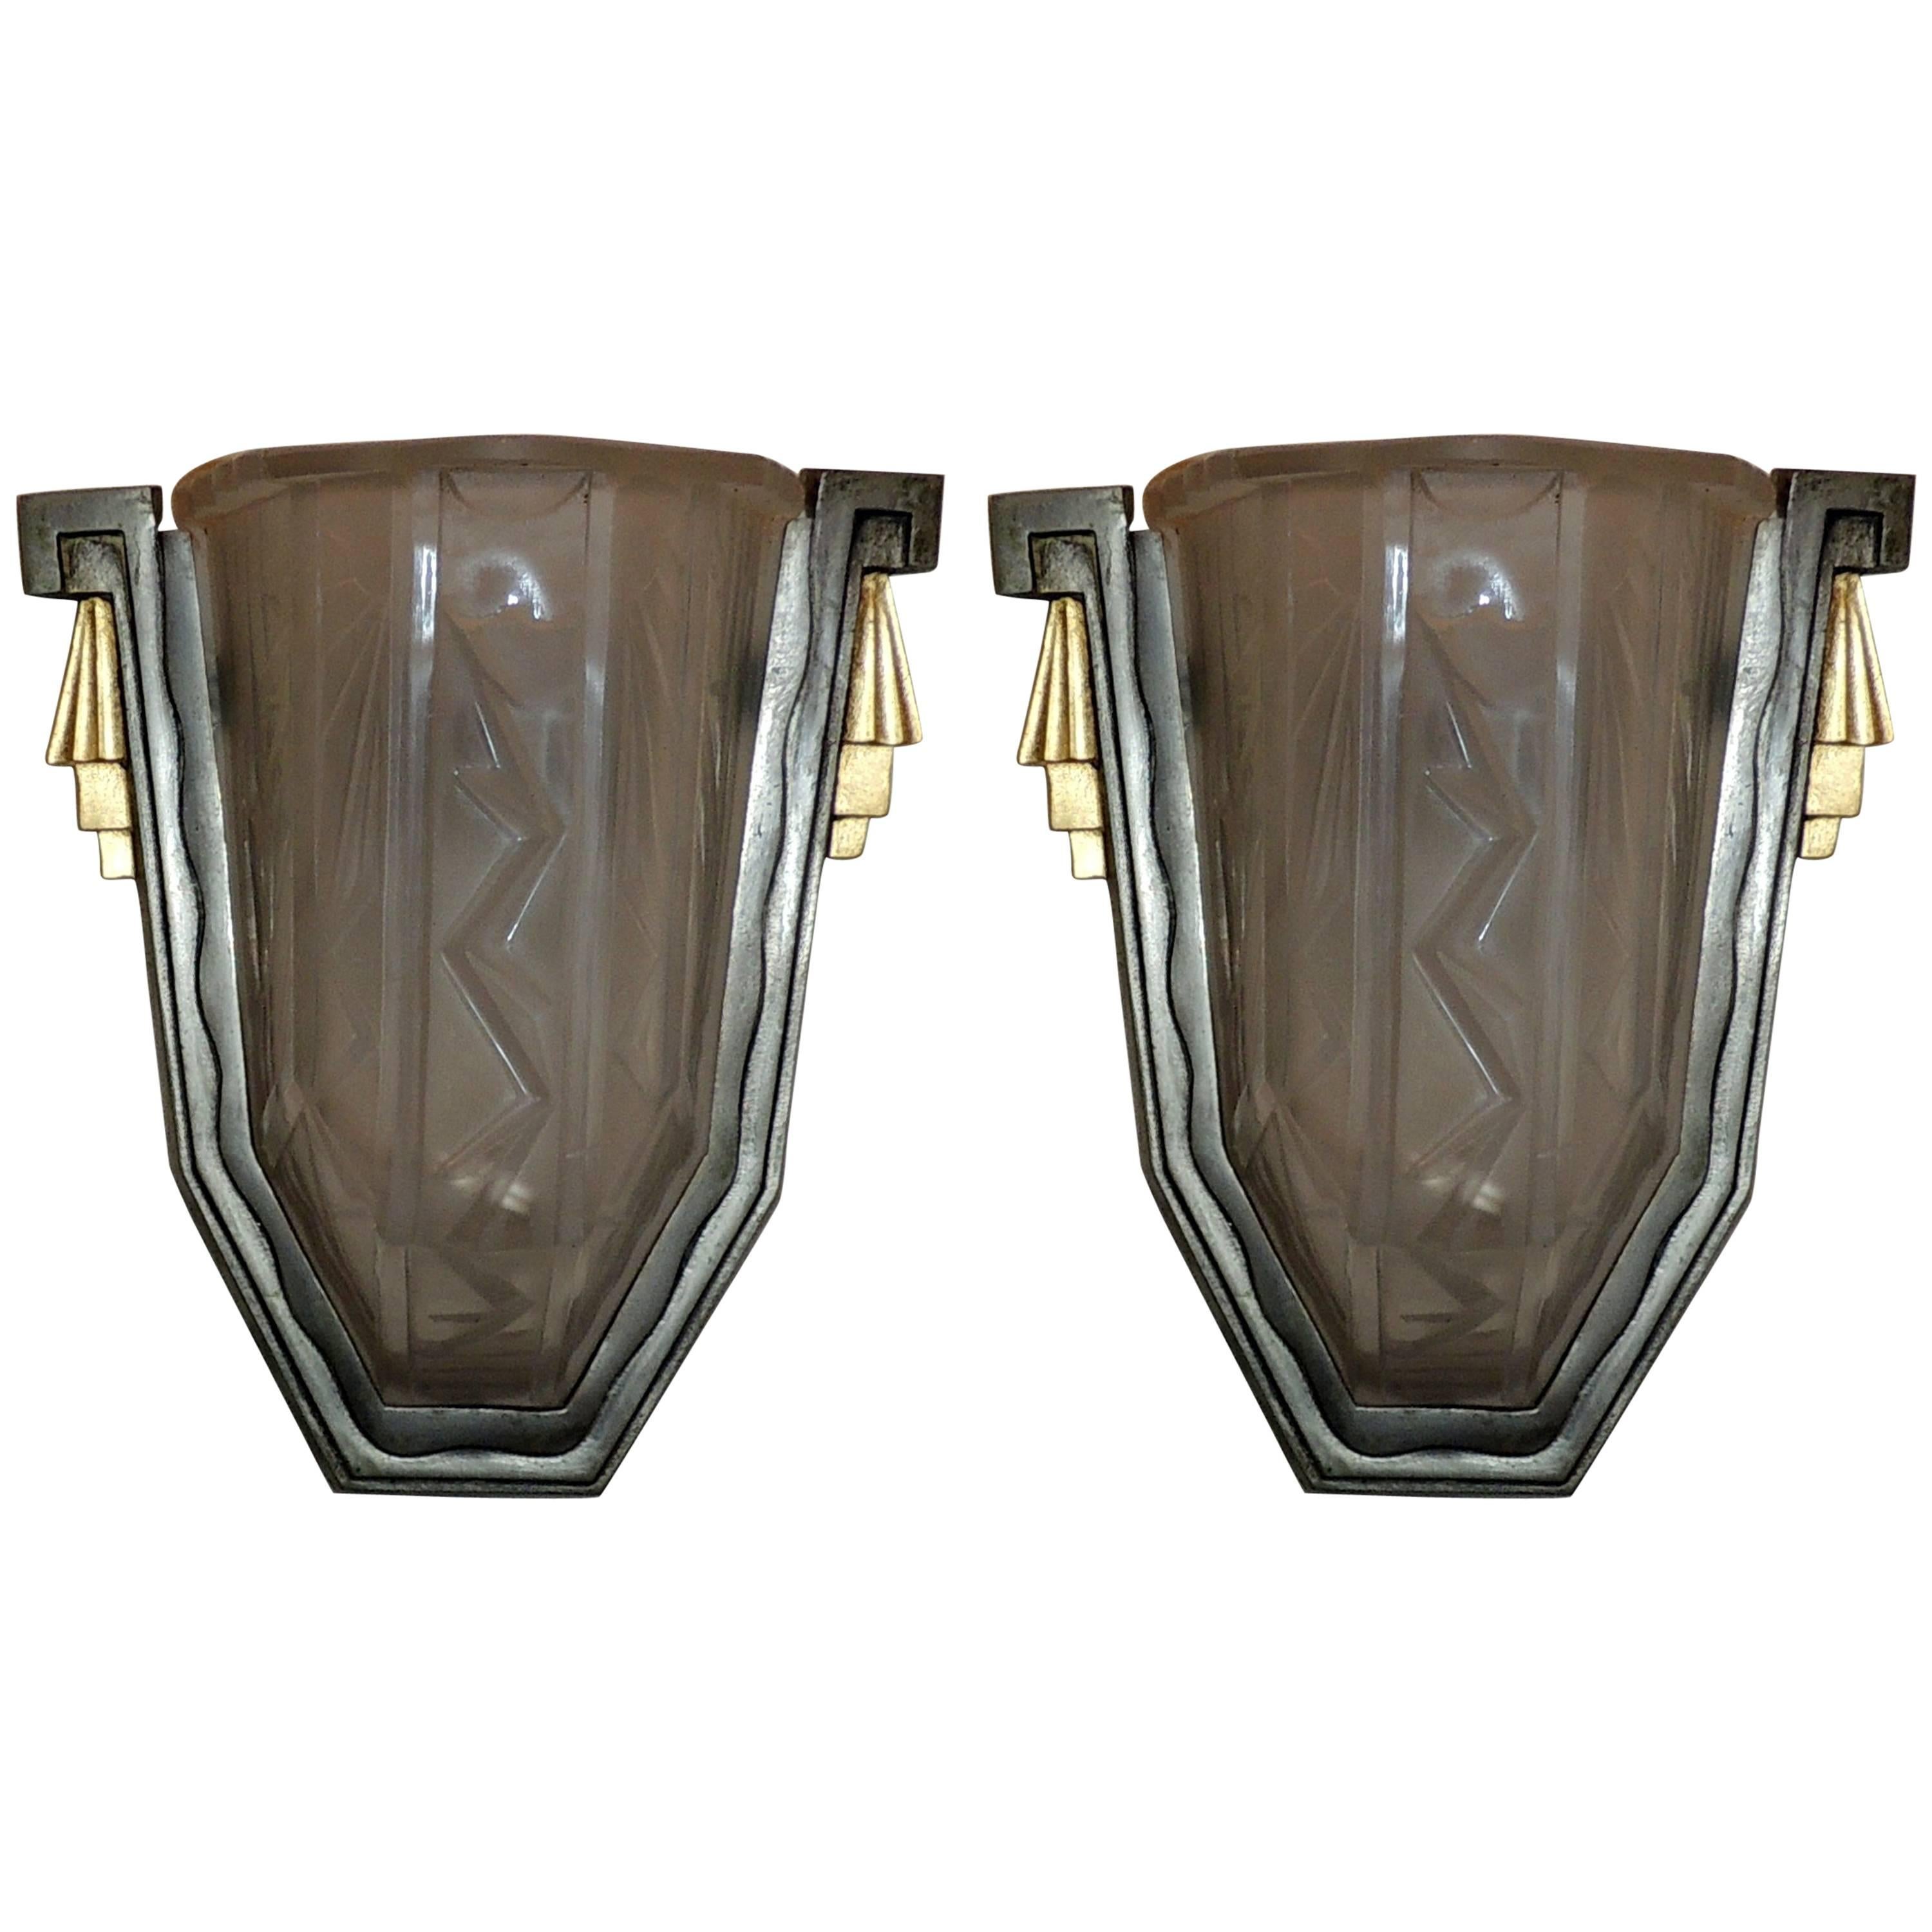 Wonderful Pair of Art Deco Frosted Glass Brushed Nickel Gilt Bronze Wall Sconces